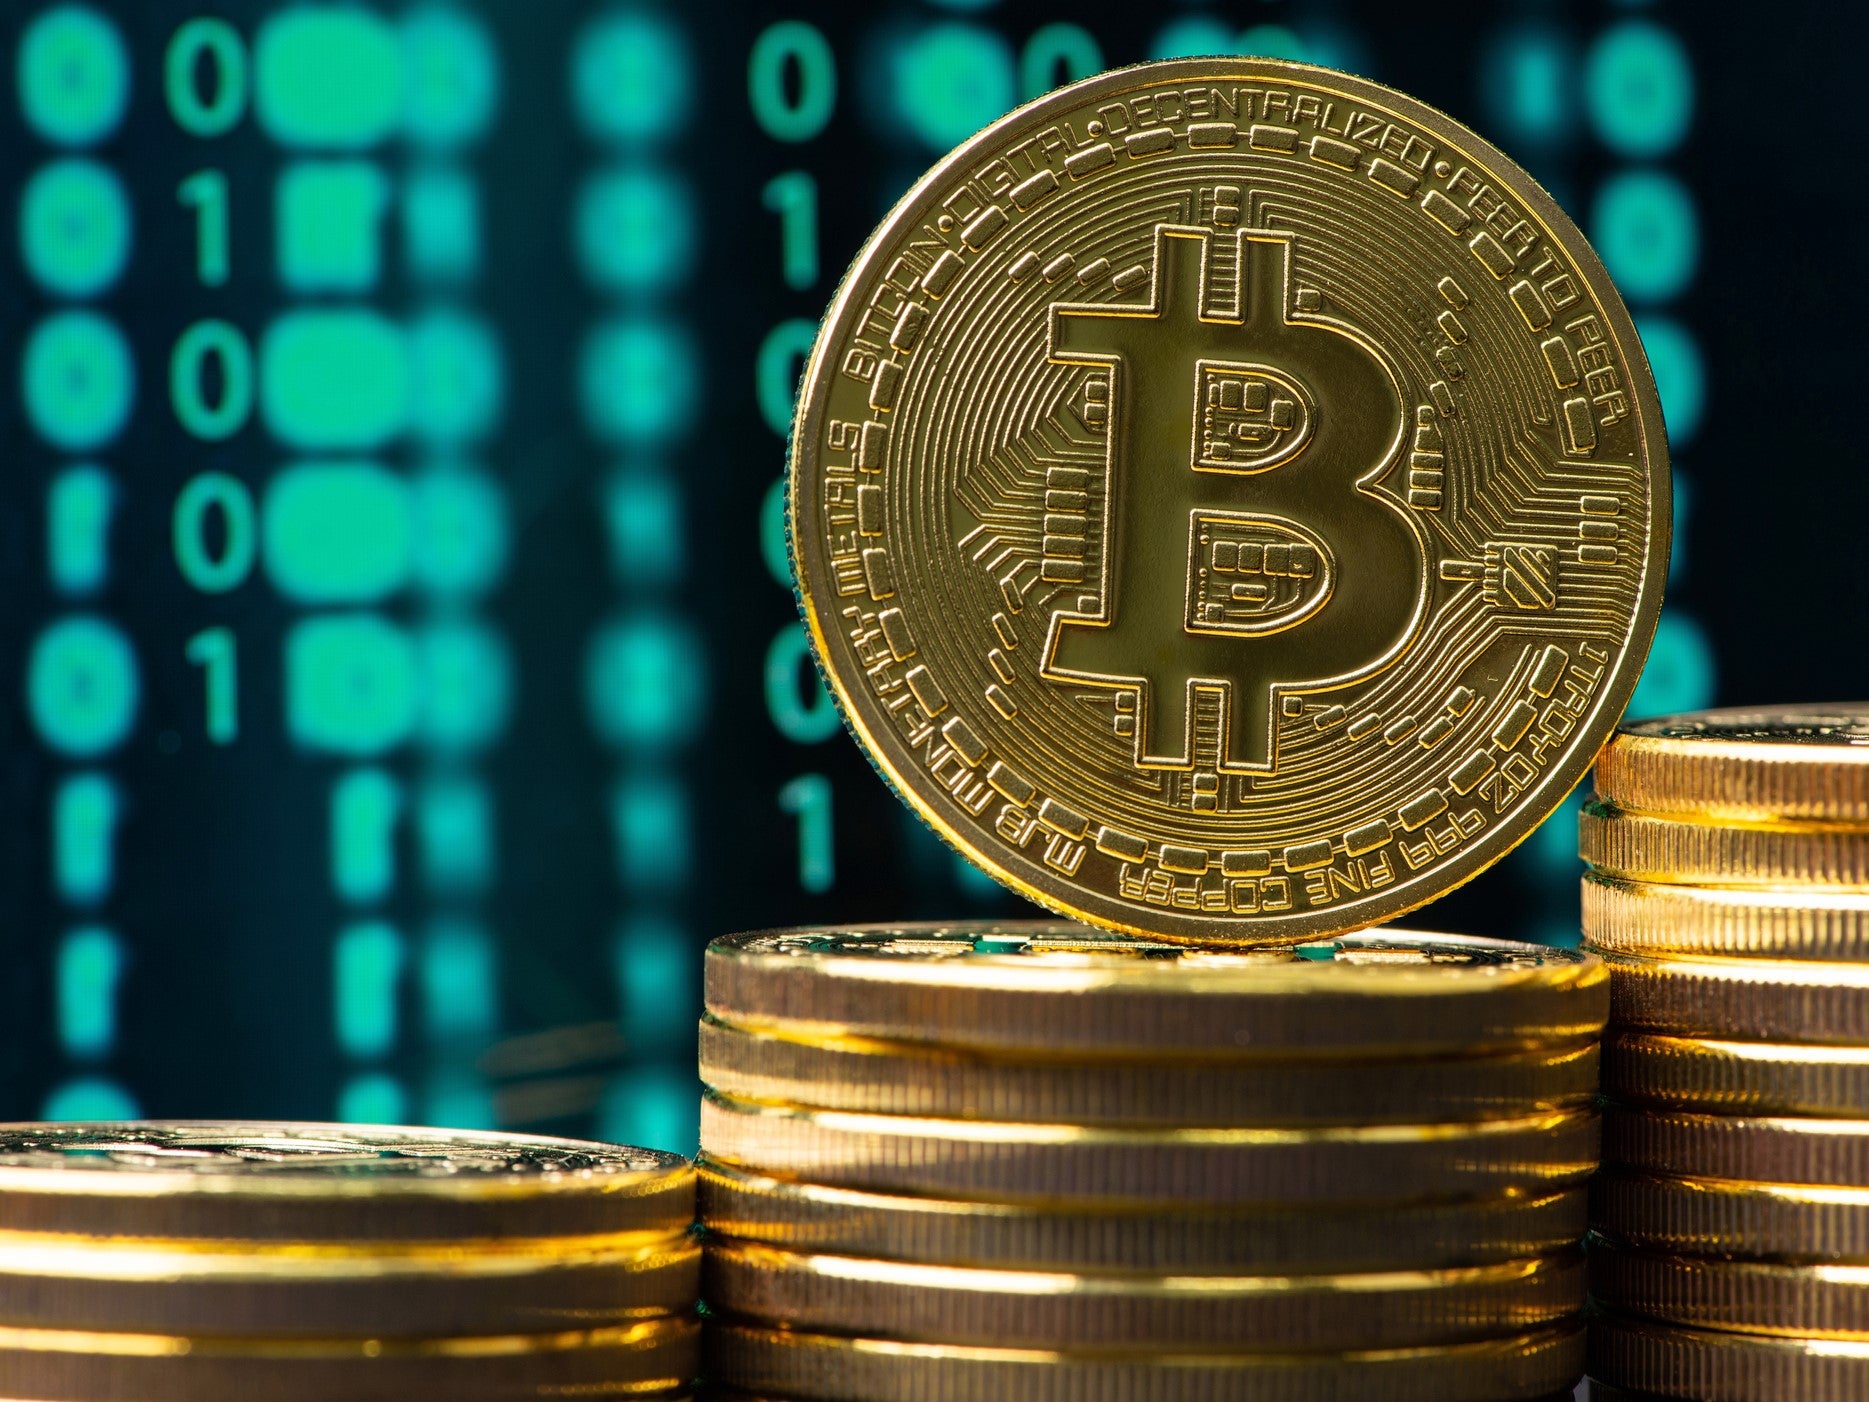 Bitcoin and other cryptocurrencies can be extremely volatile